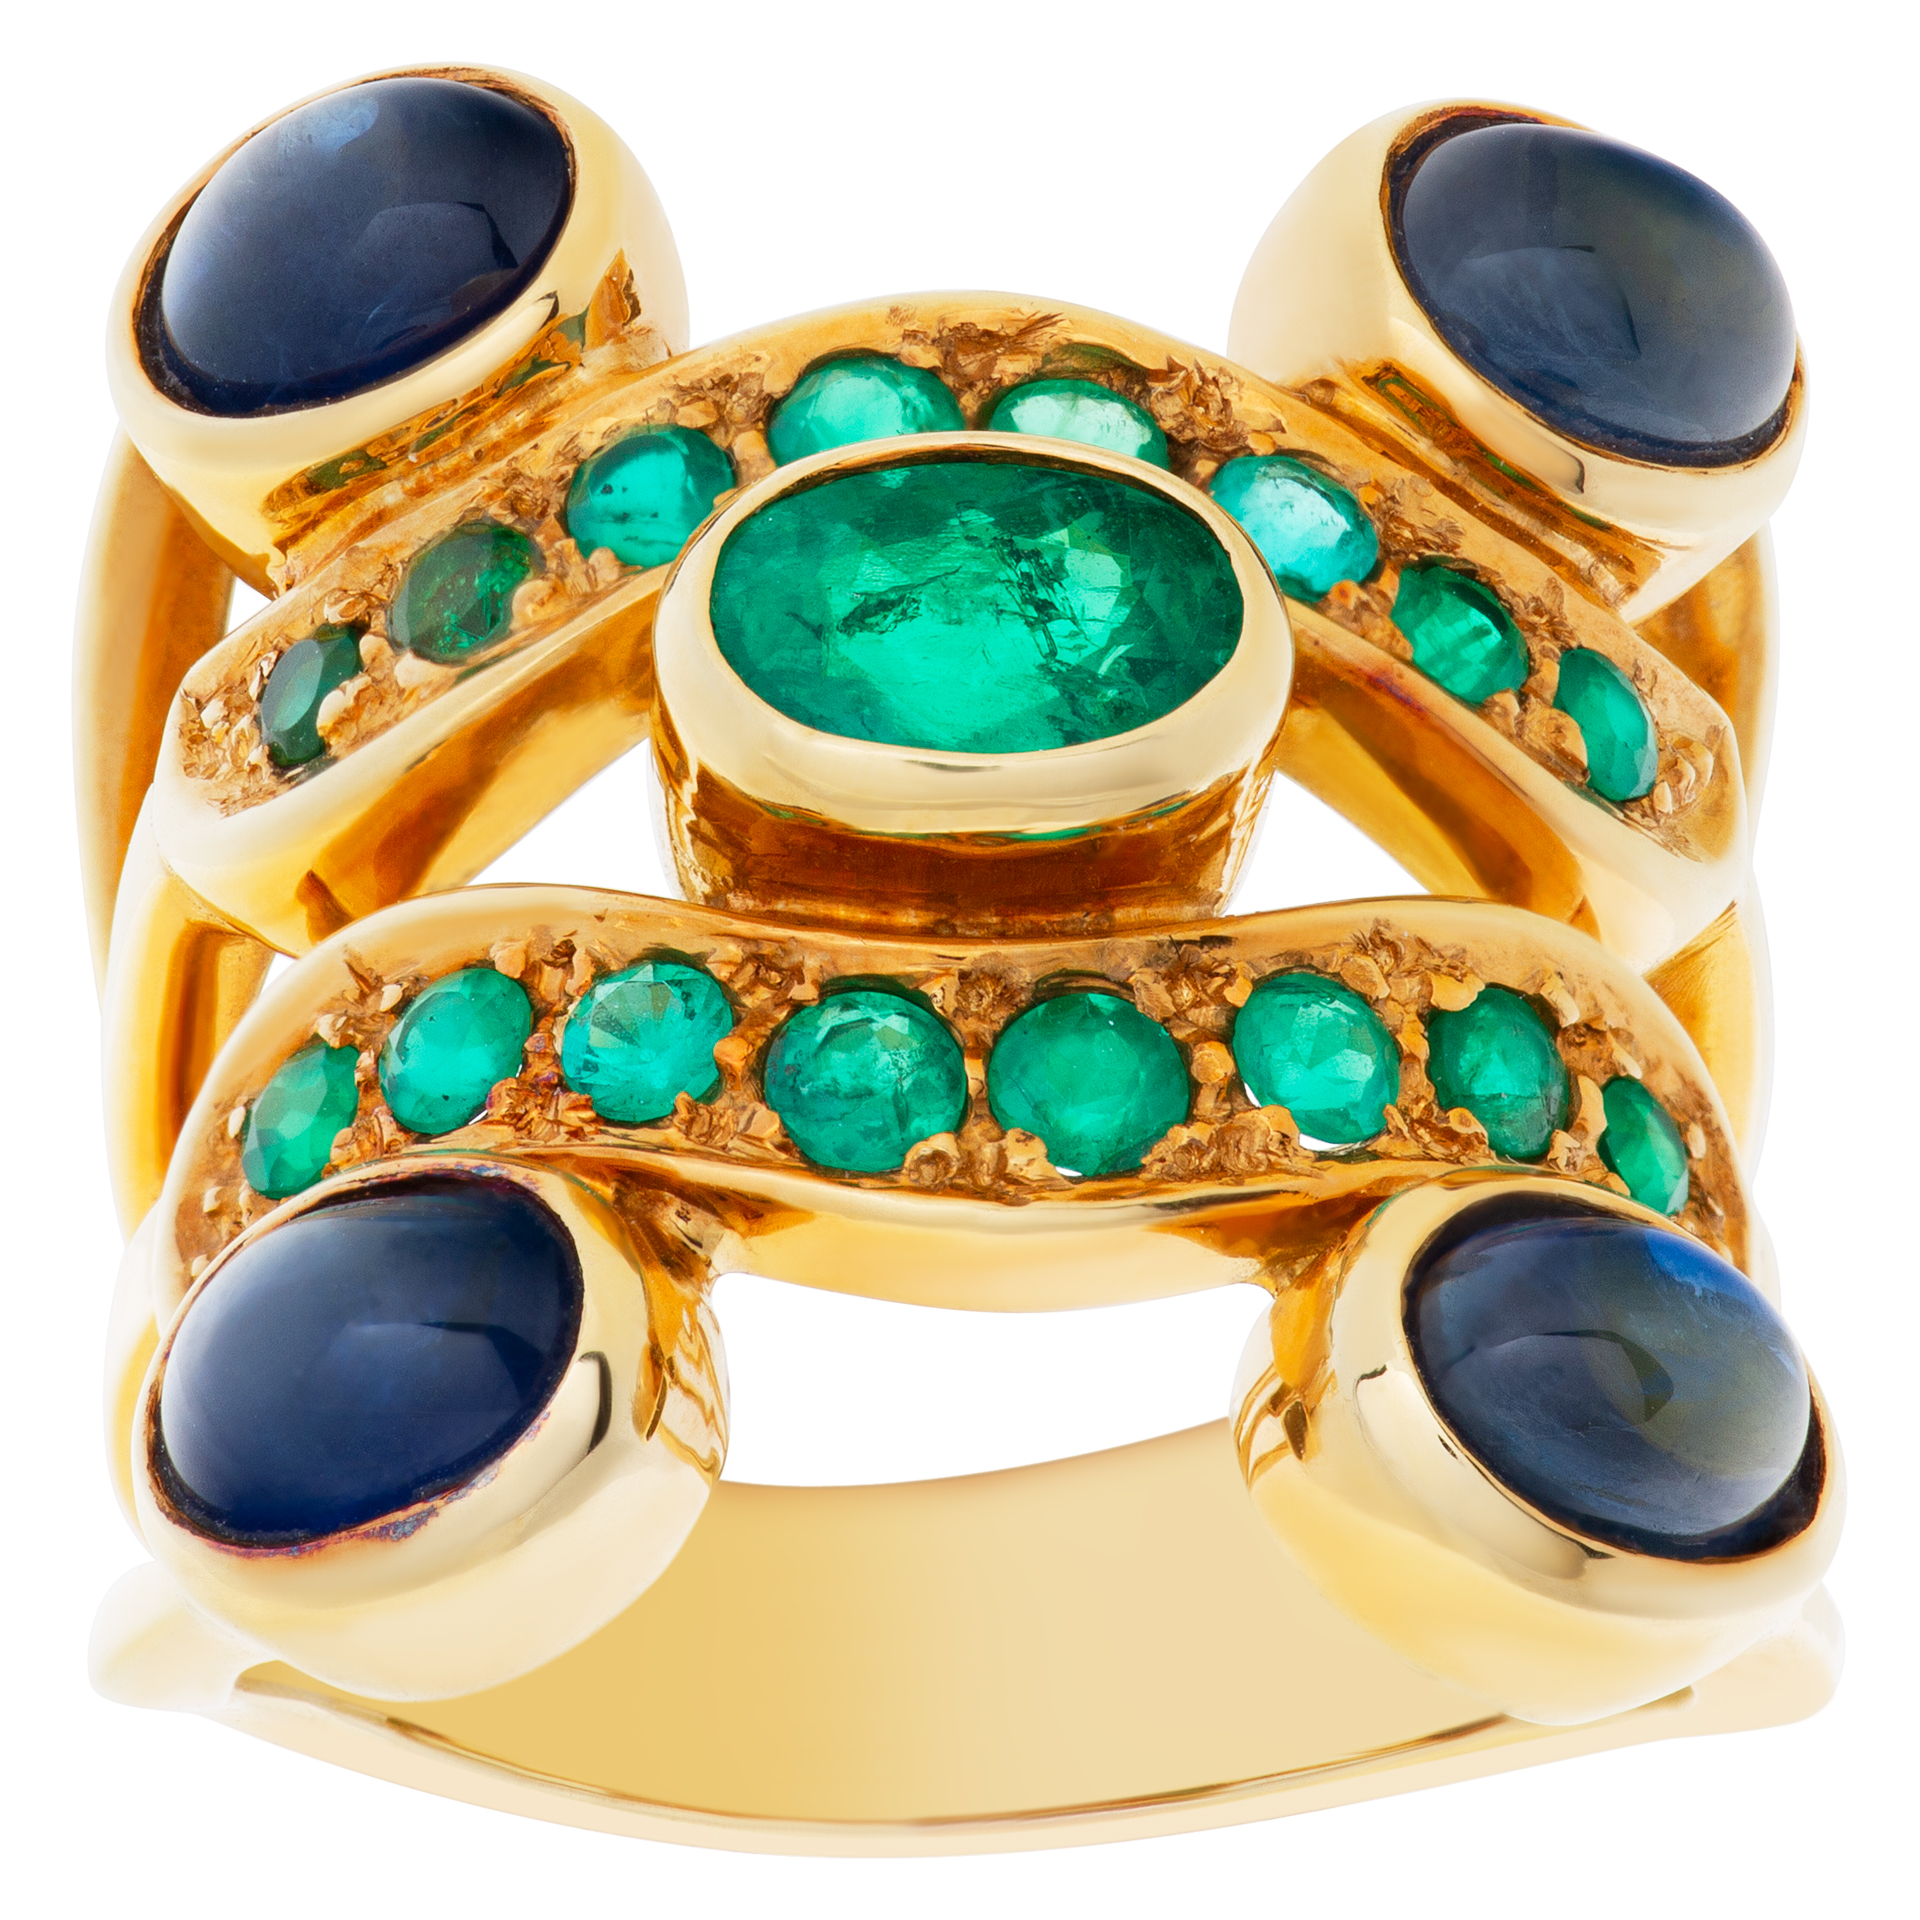 Brilliant oval and round cut Emeralds, cabochon sapphires ring set in 18k yellow gold.